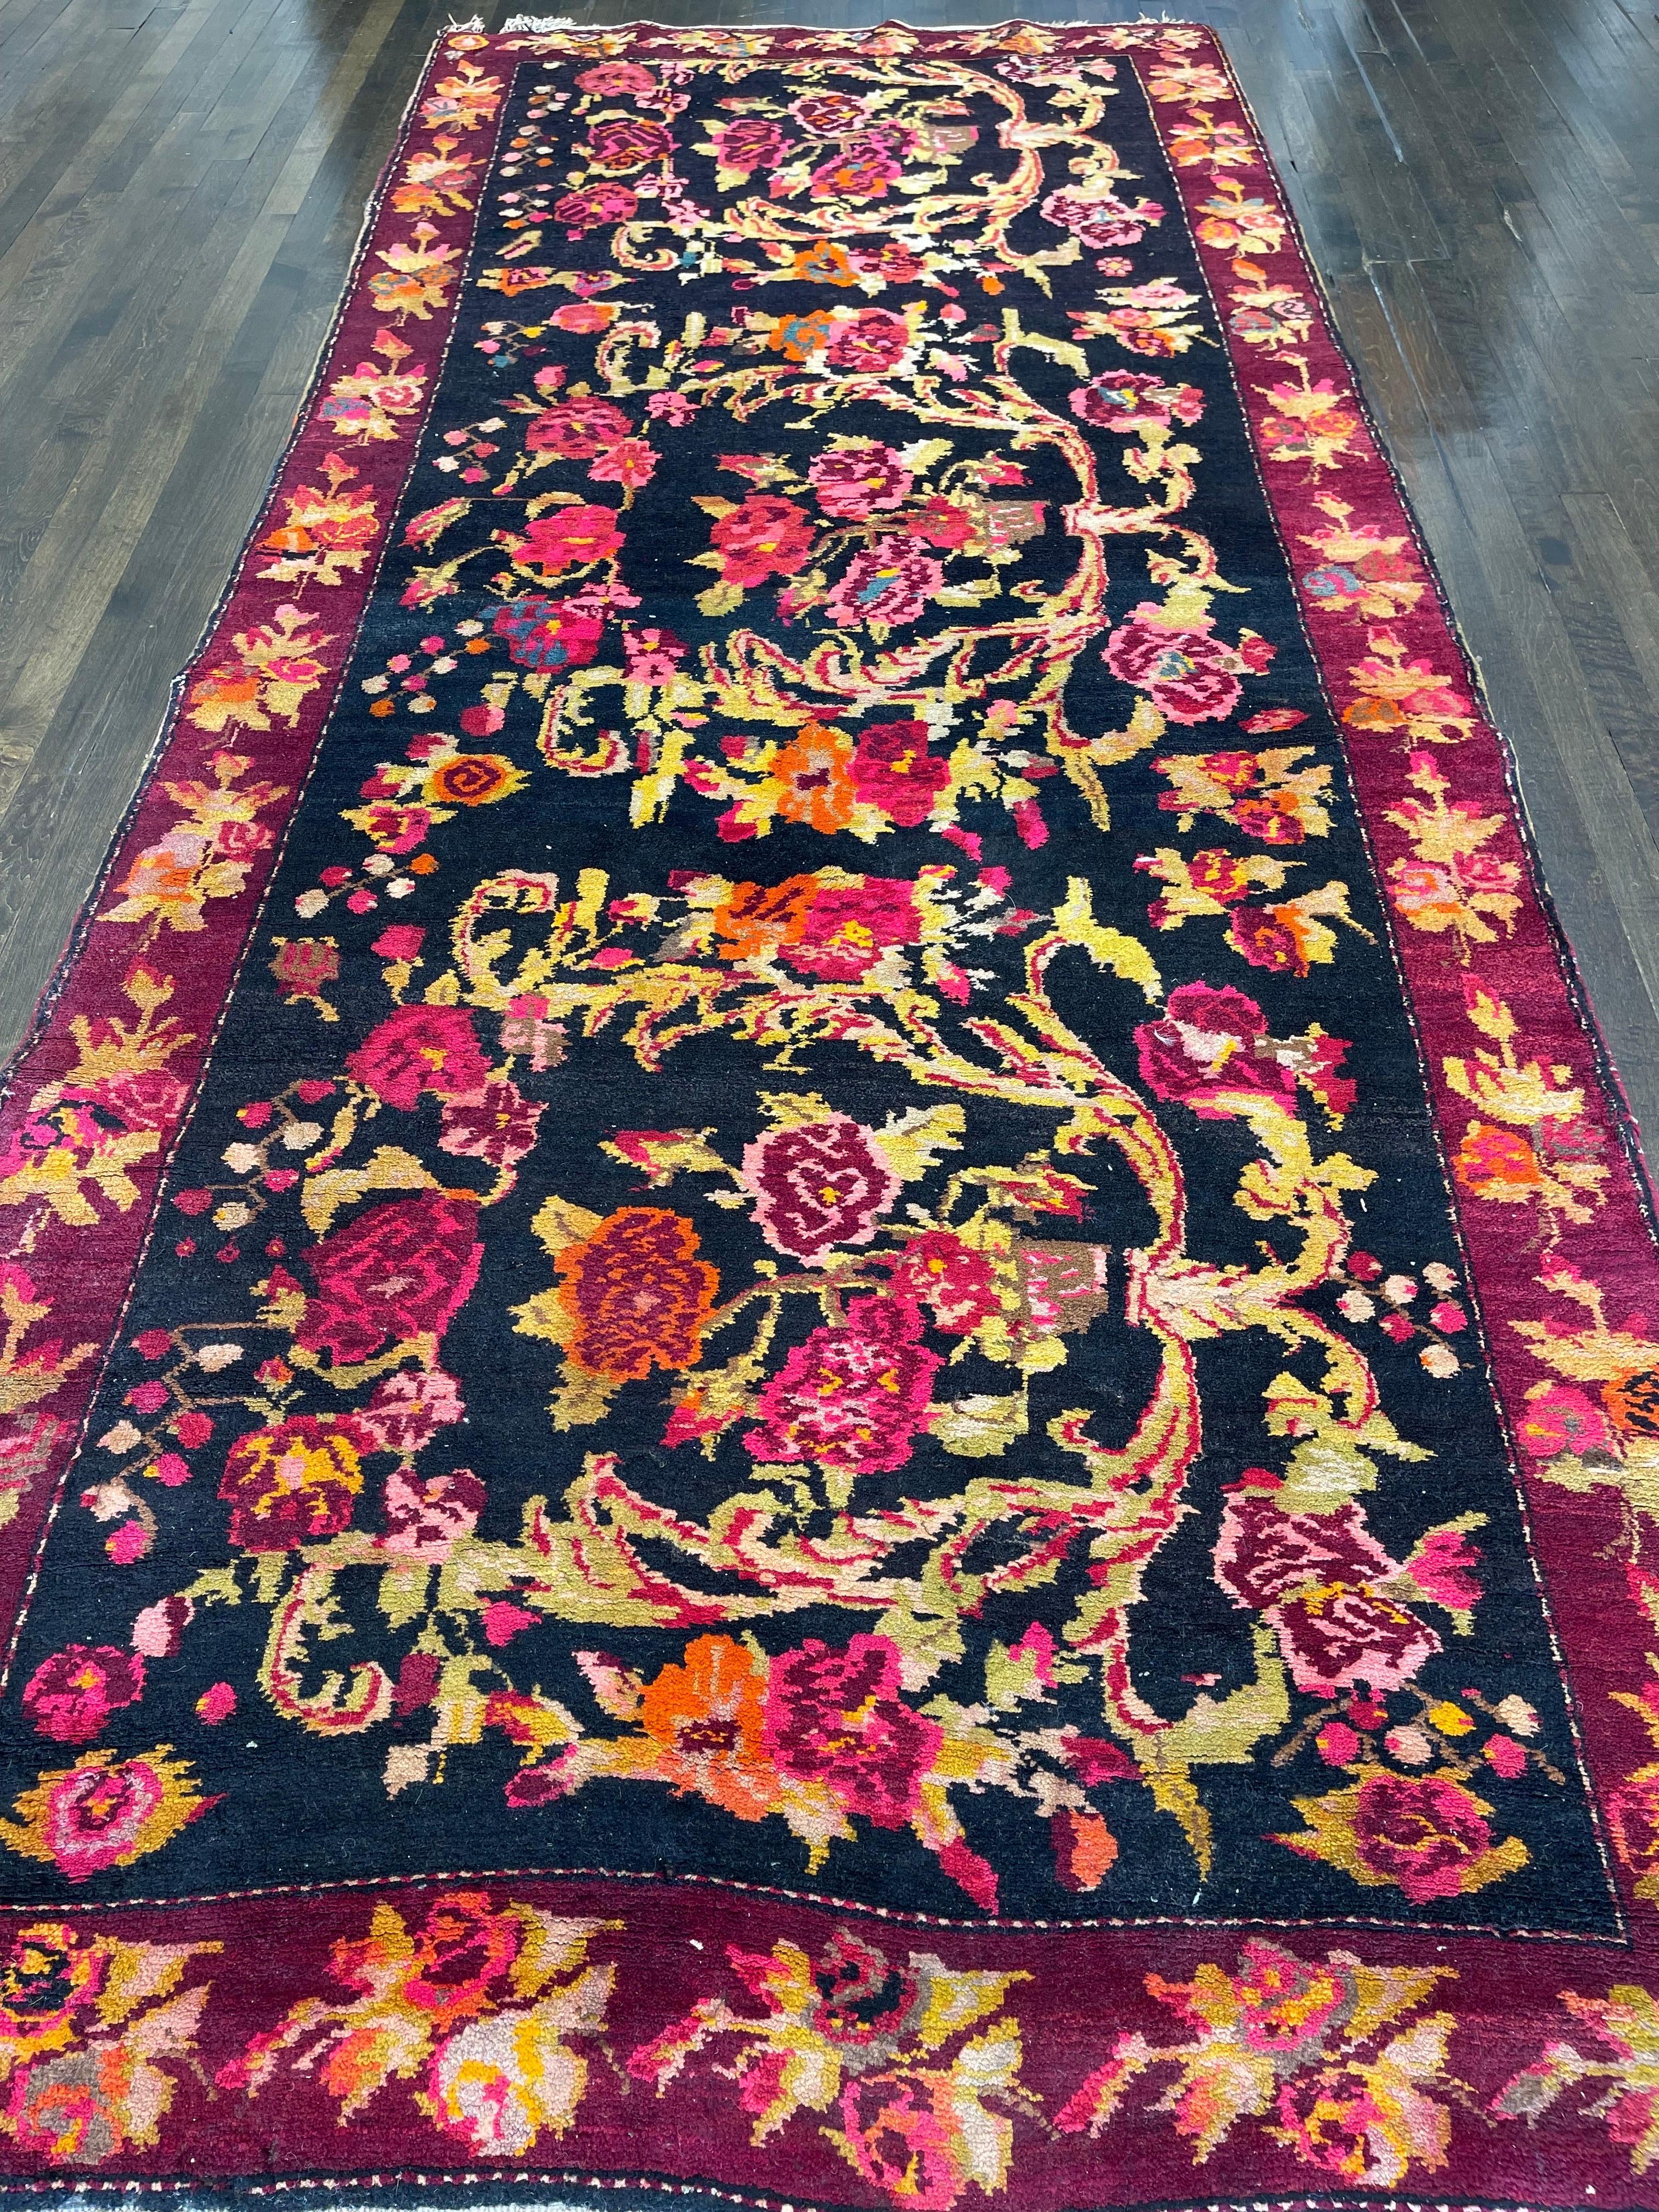 An outstanding example of Caucasian carpets woven in the European style created by Caucasian artisans, this corridor size runner features a floral composition on a black field surrounded by red/maroon borders. The Karabaghs in this style are